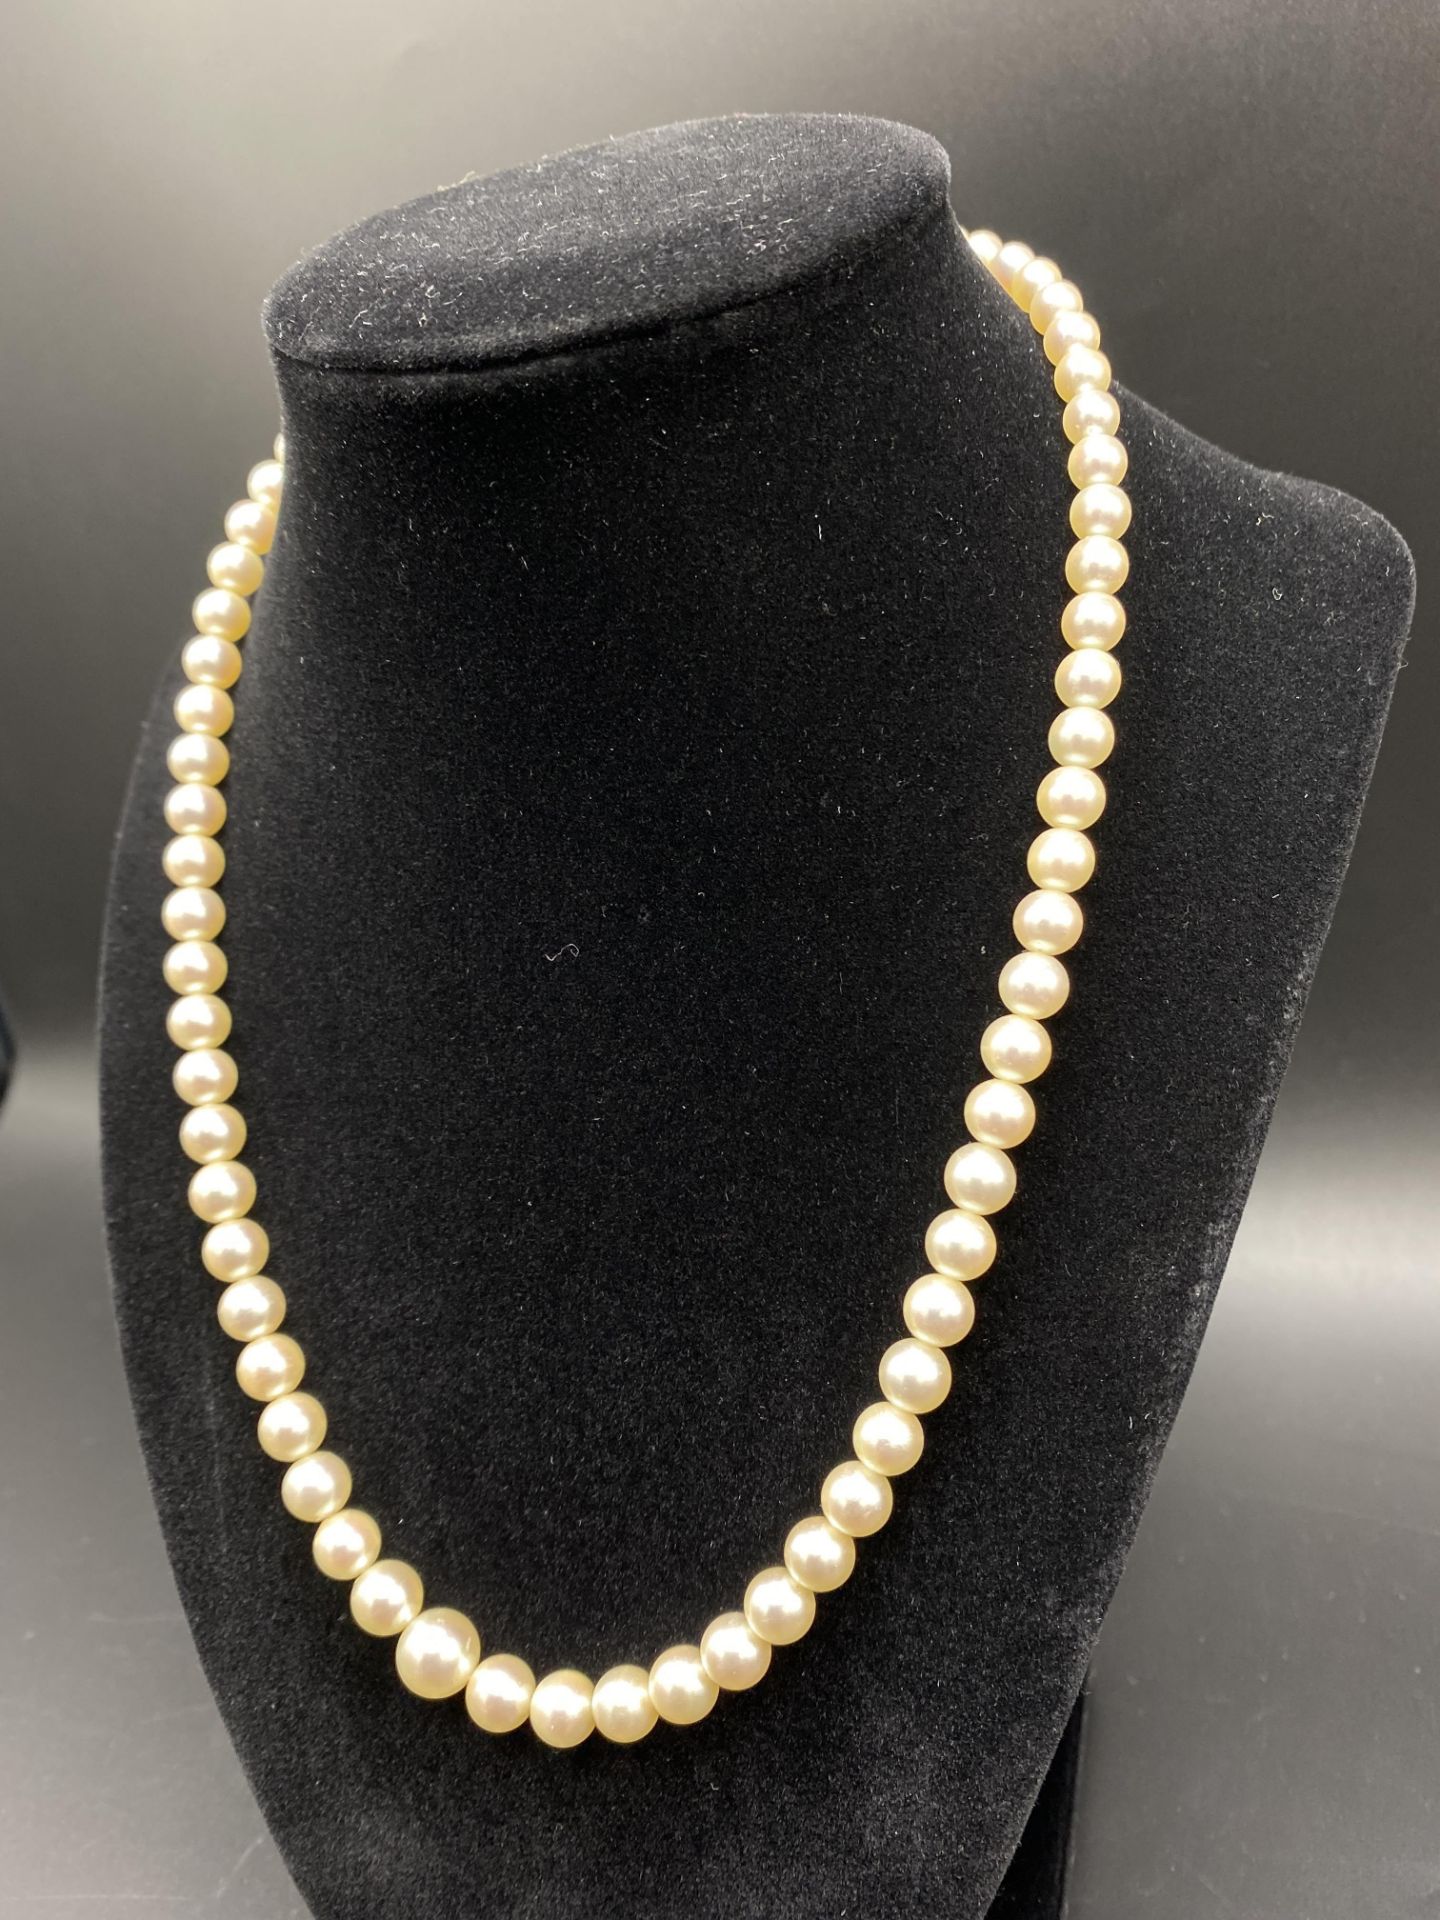 Pearl necklace with matching earrings - Image 4 of 7